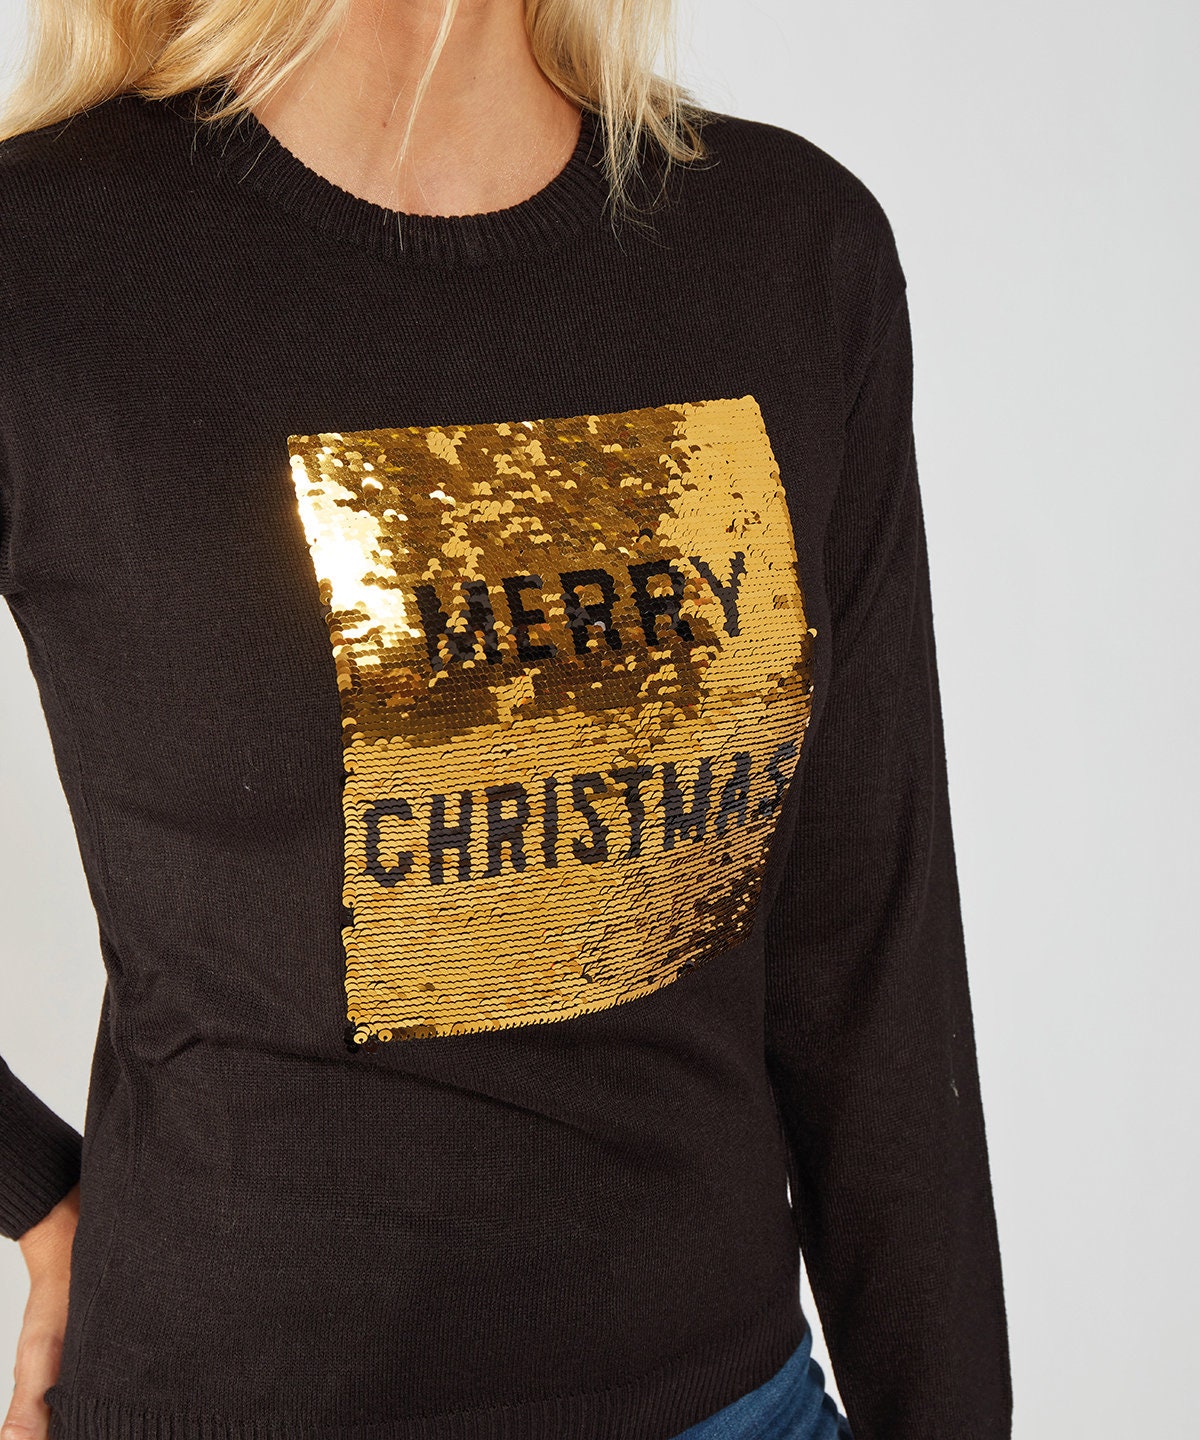 Womens Christmas Jumper, New Year Jumper 2023, Christmas Sequin Sweatshirt, Funny Christmas Jumper, Christmas Gift for her, Ladies Sweater